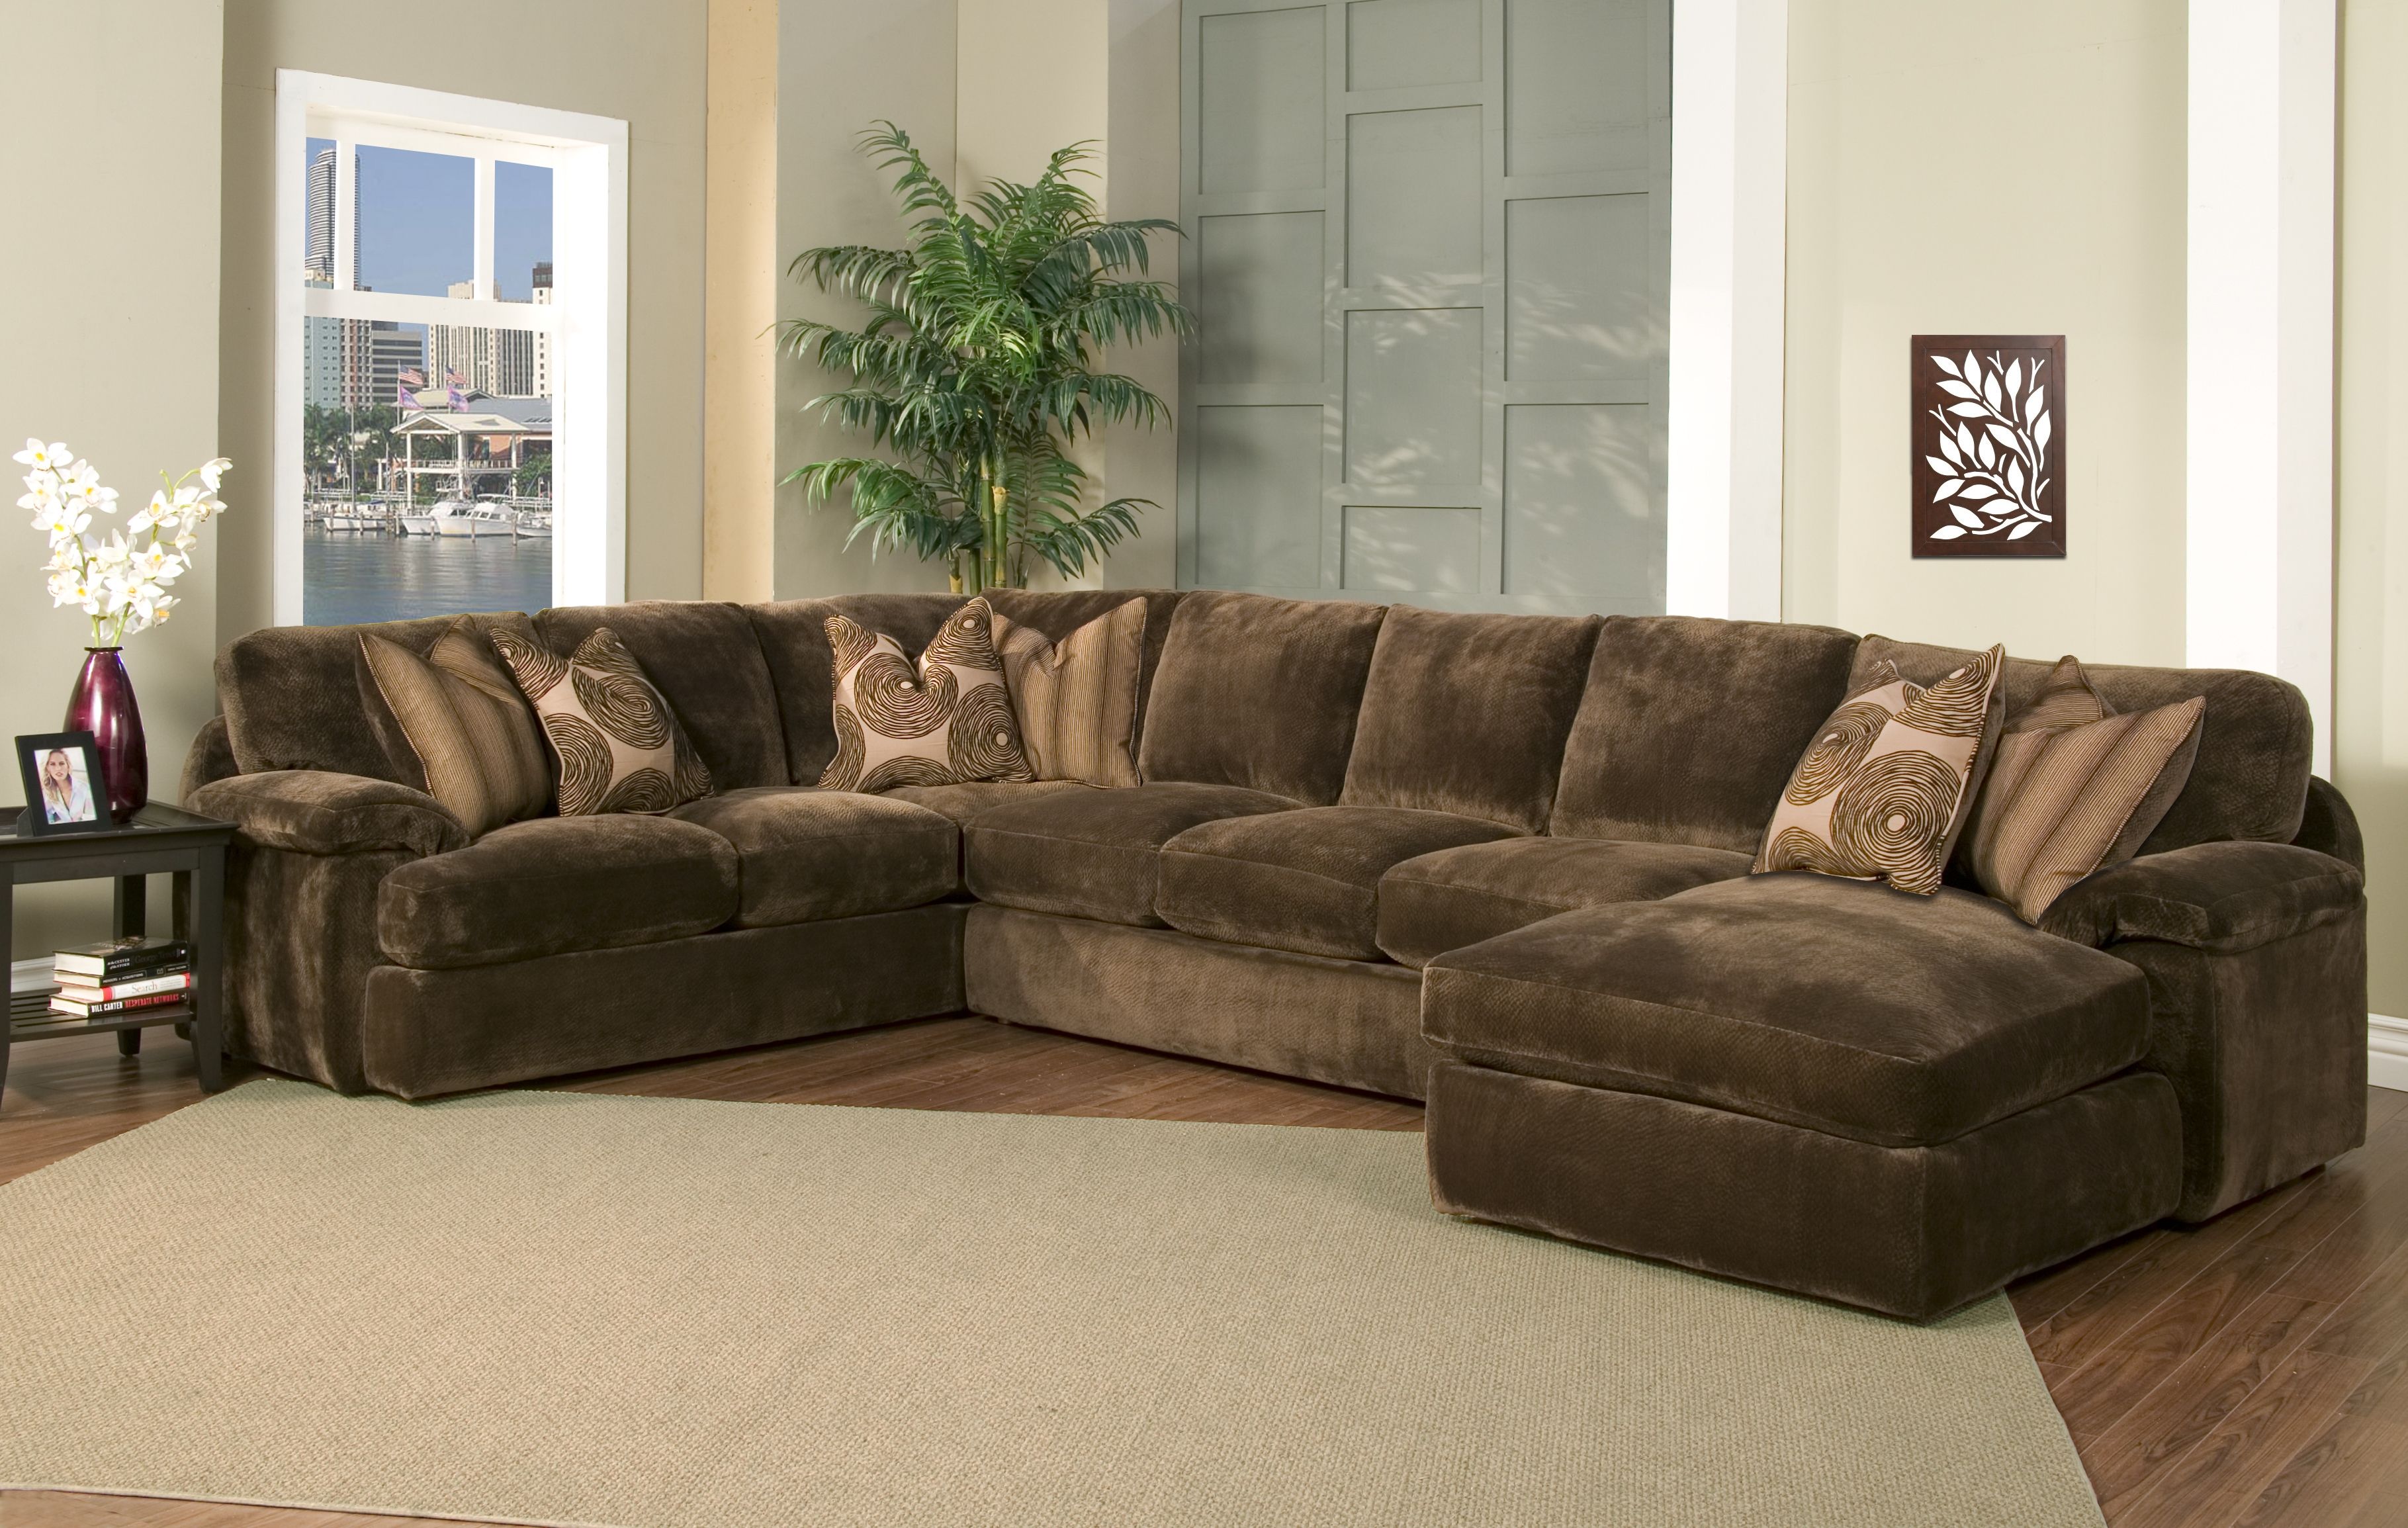 Furniture Sofas With Down Cushions Robert Michaels Furniture Intended For Down Filled Sectional Sofas (View 5 of 15)